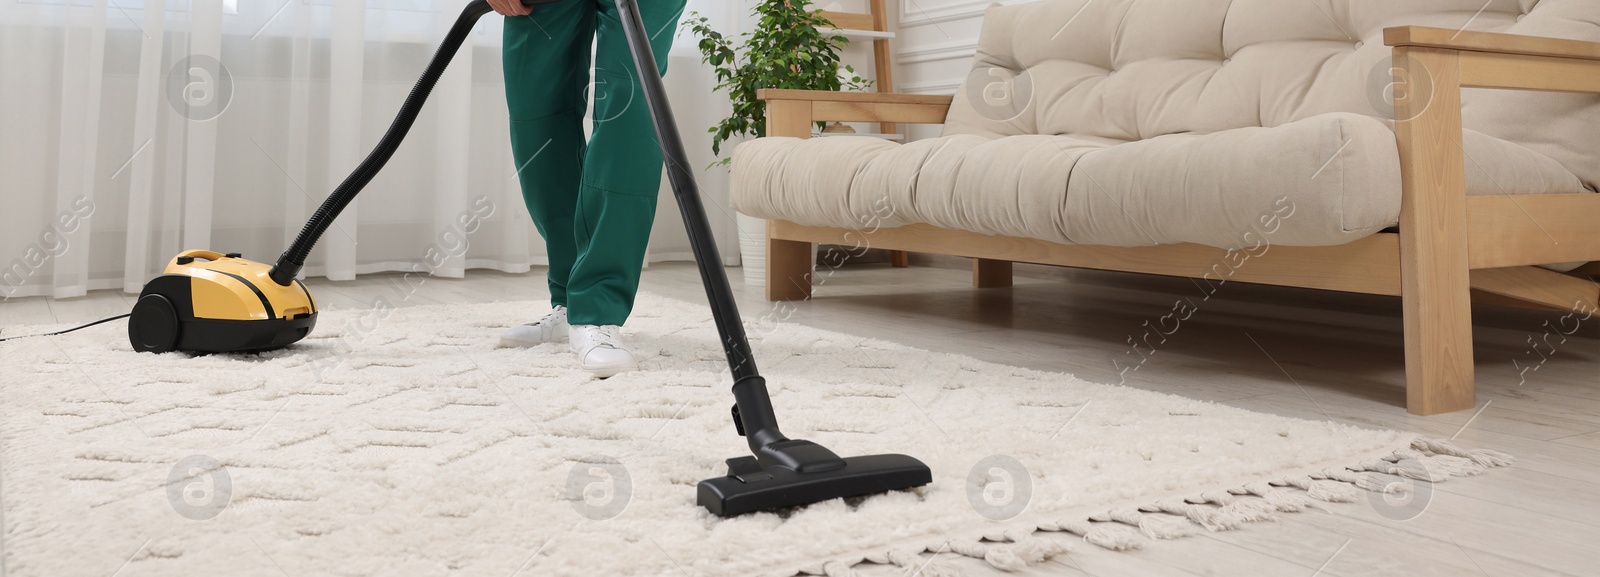 Image of Dry cleaner's employee hoovering carpet with vacuum cleaner in room, closeup. Banner design